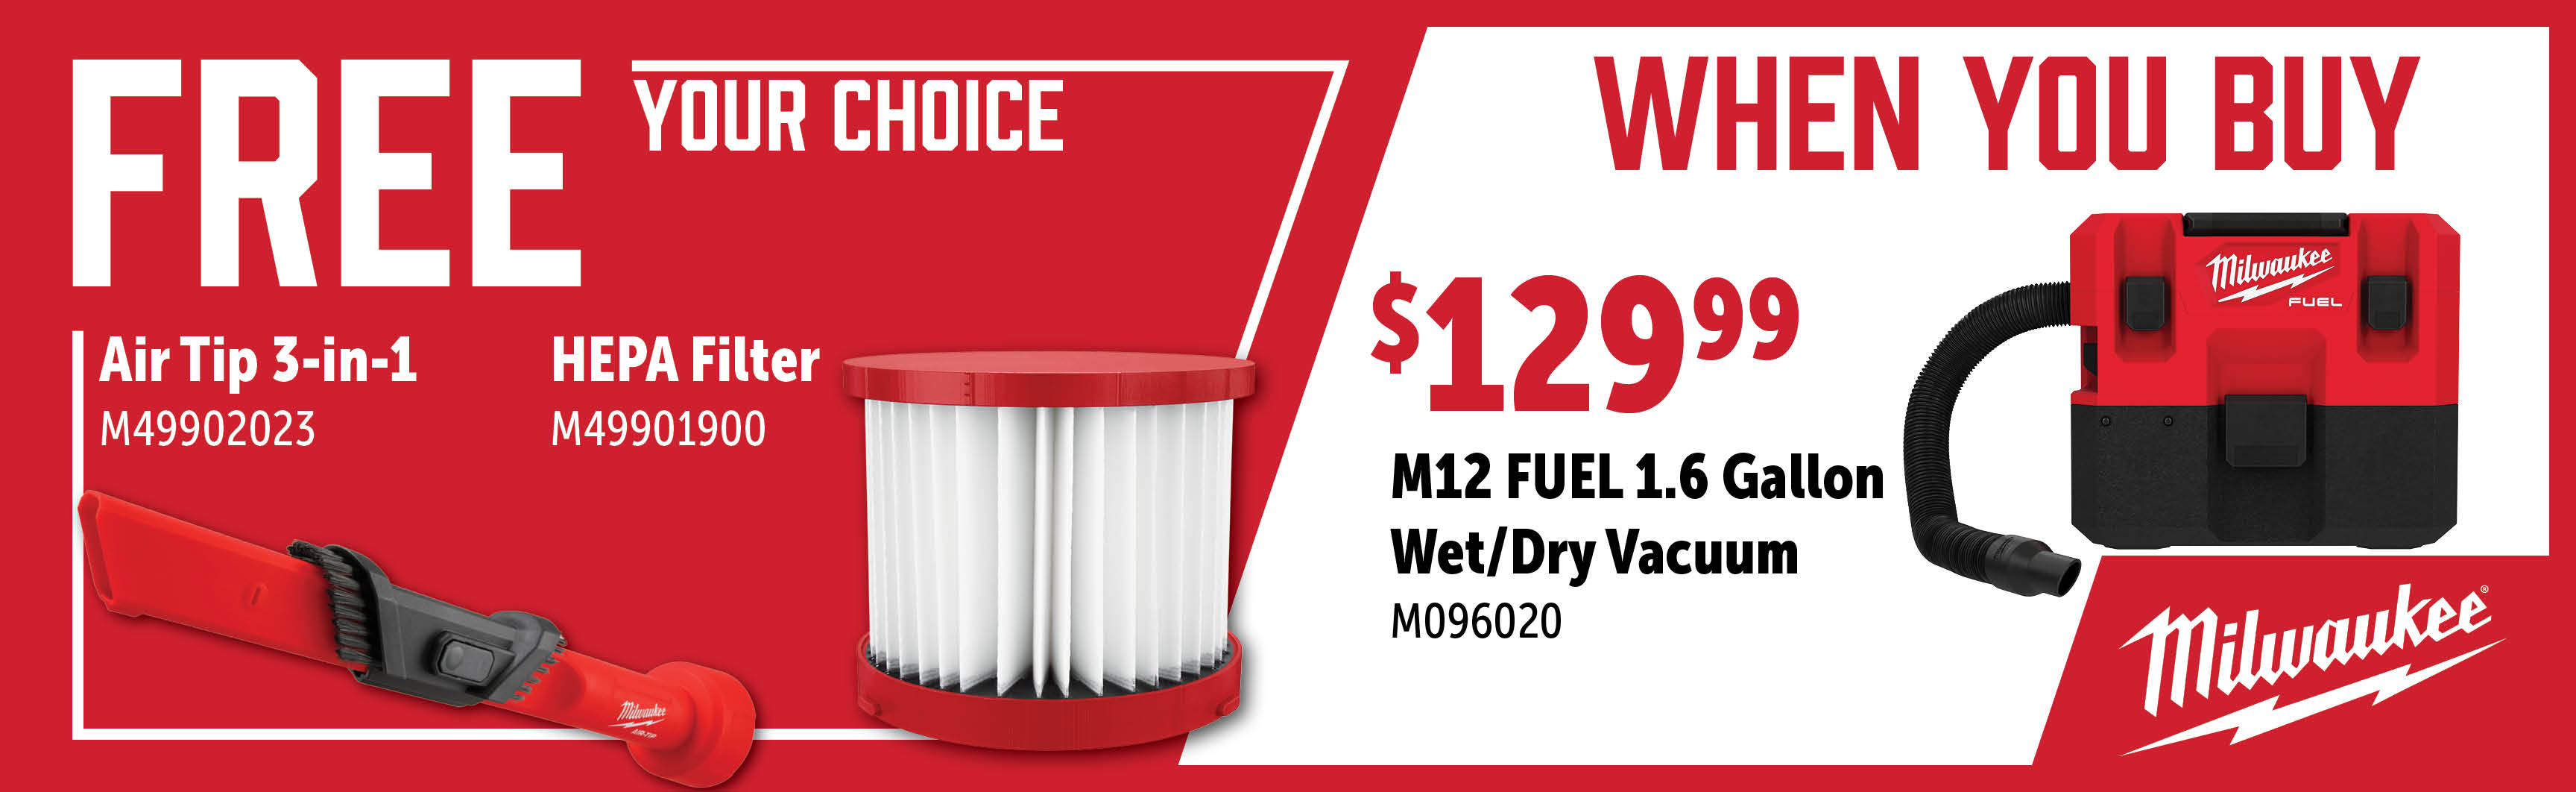 Milwaukee May - July: Buy a M096020 Vac get a FREE Accessory 